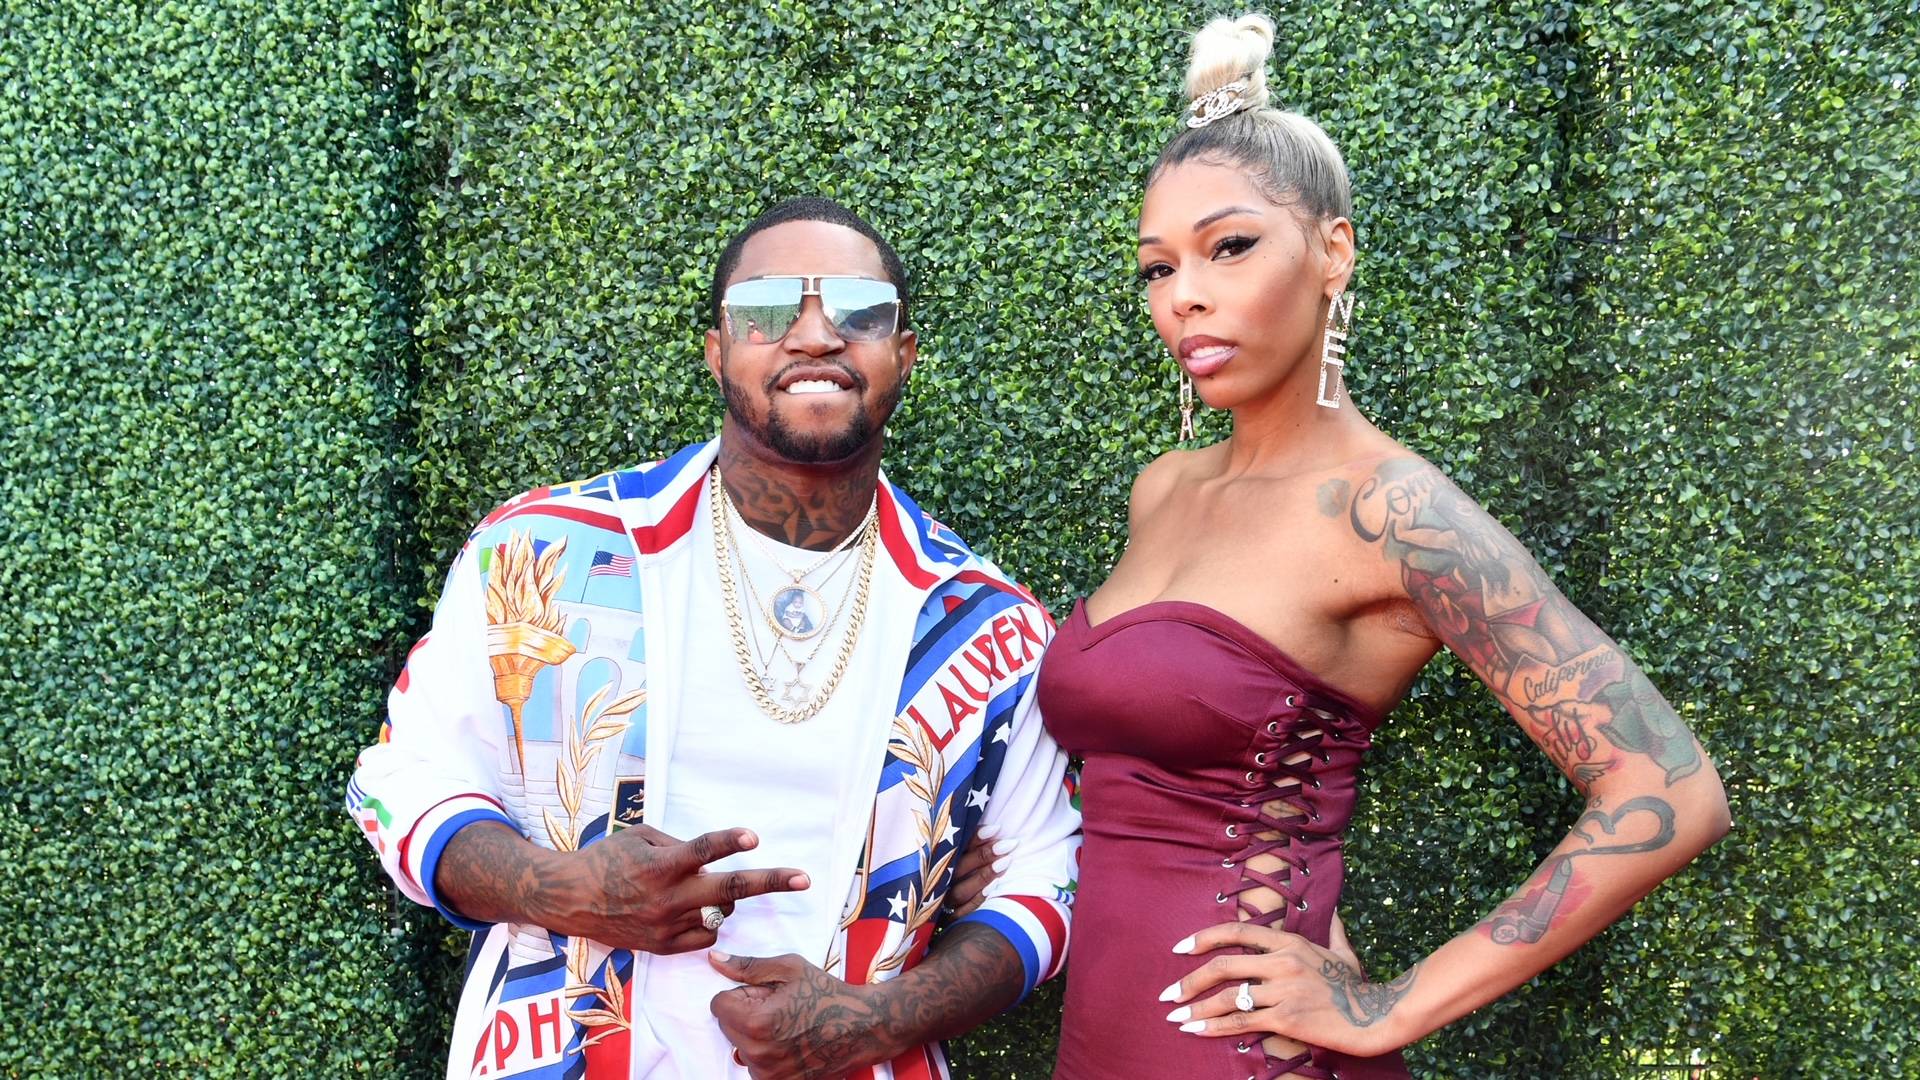 Lil Scrappy and Bambi on BET Buzz 2021.